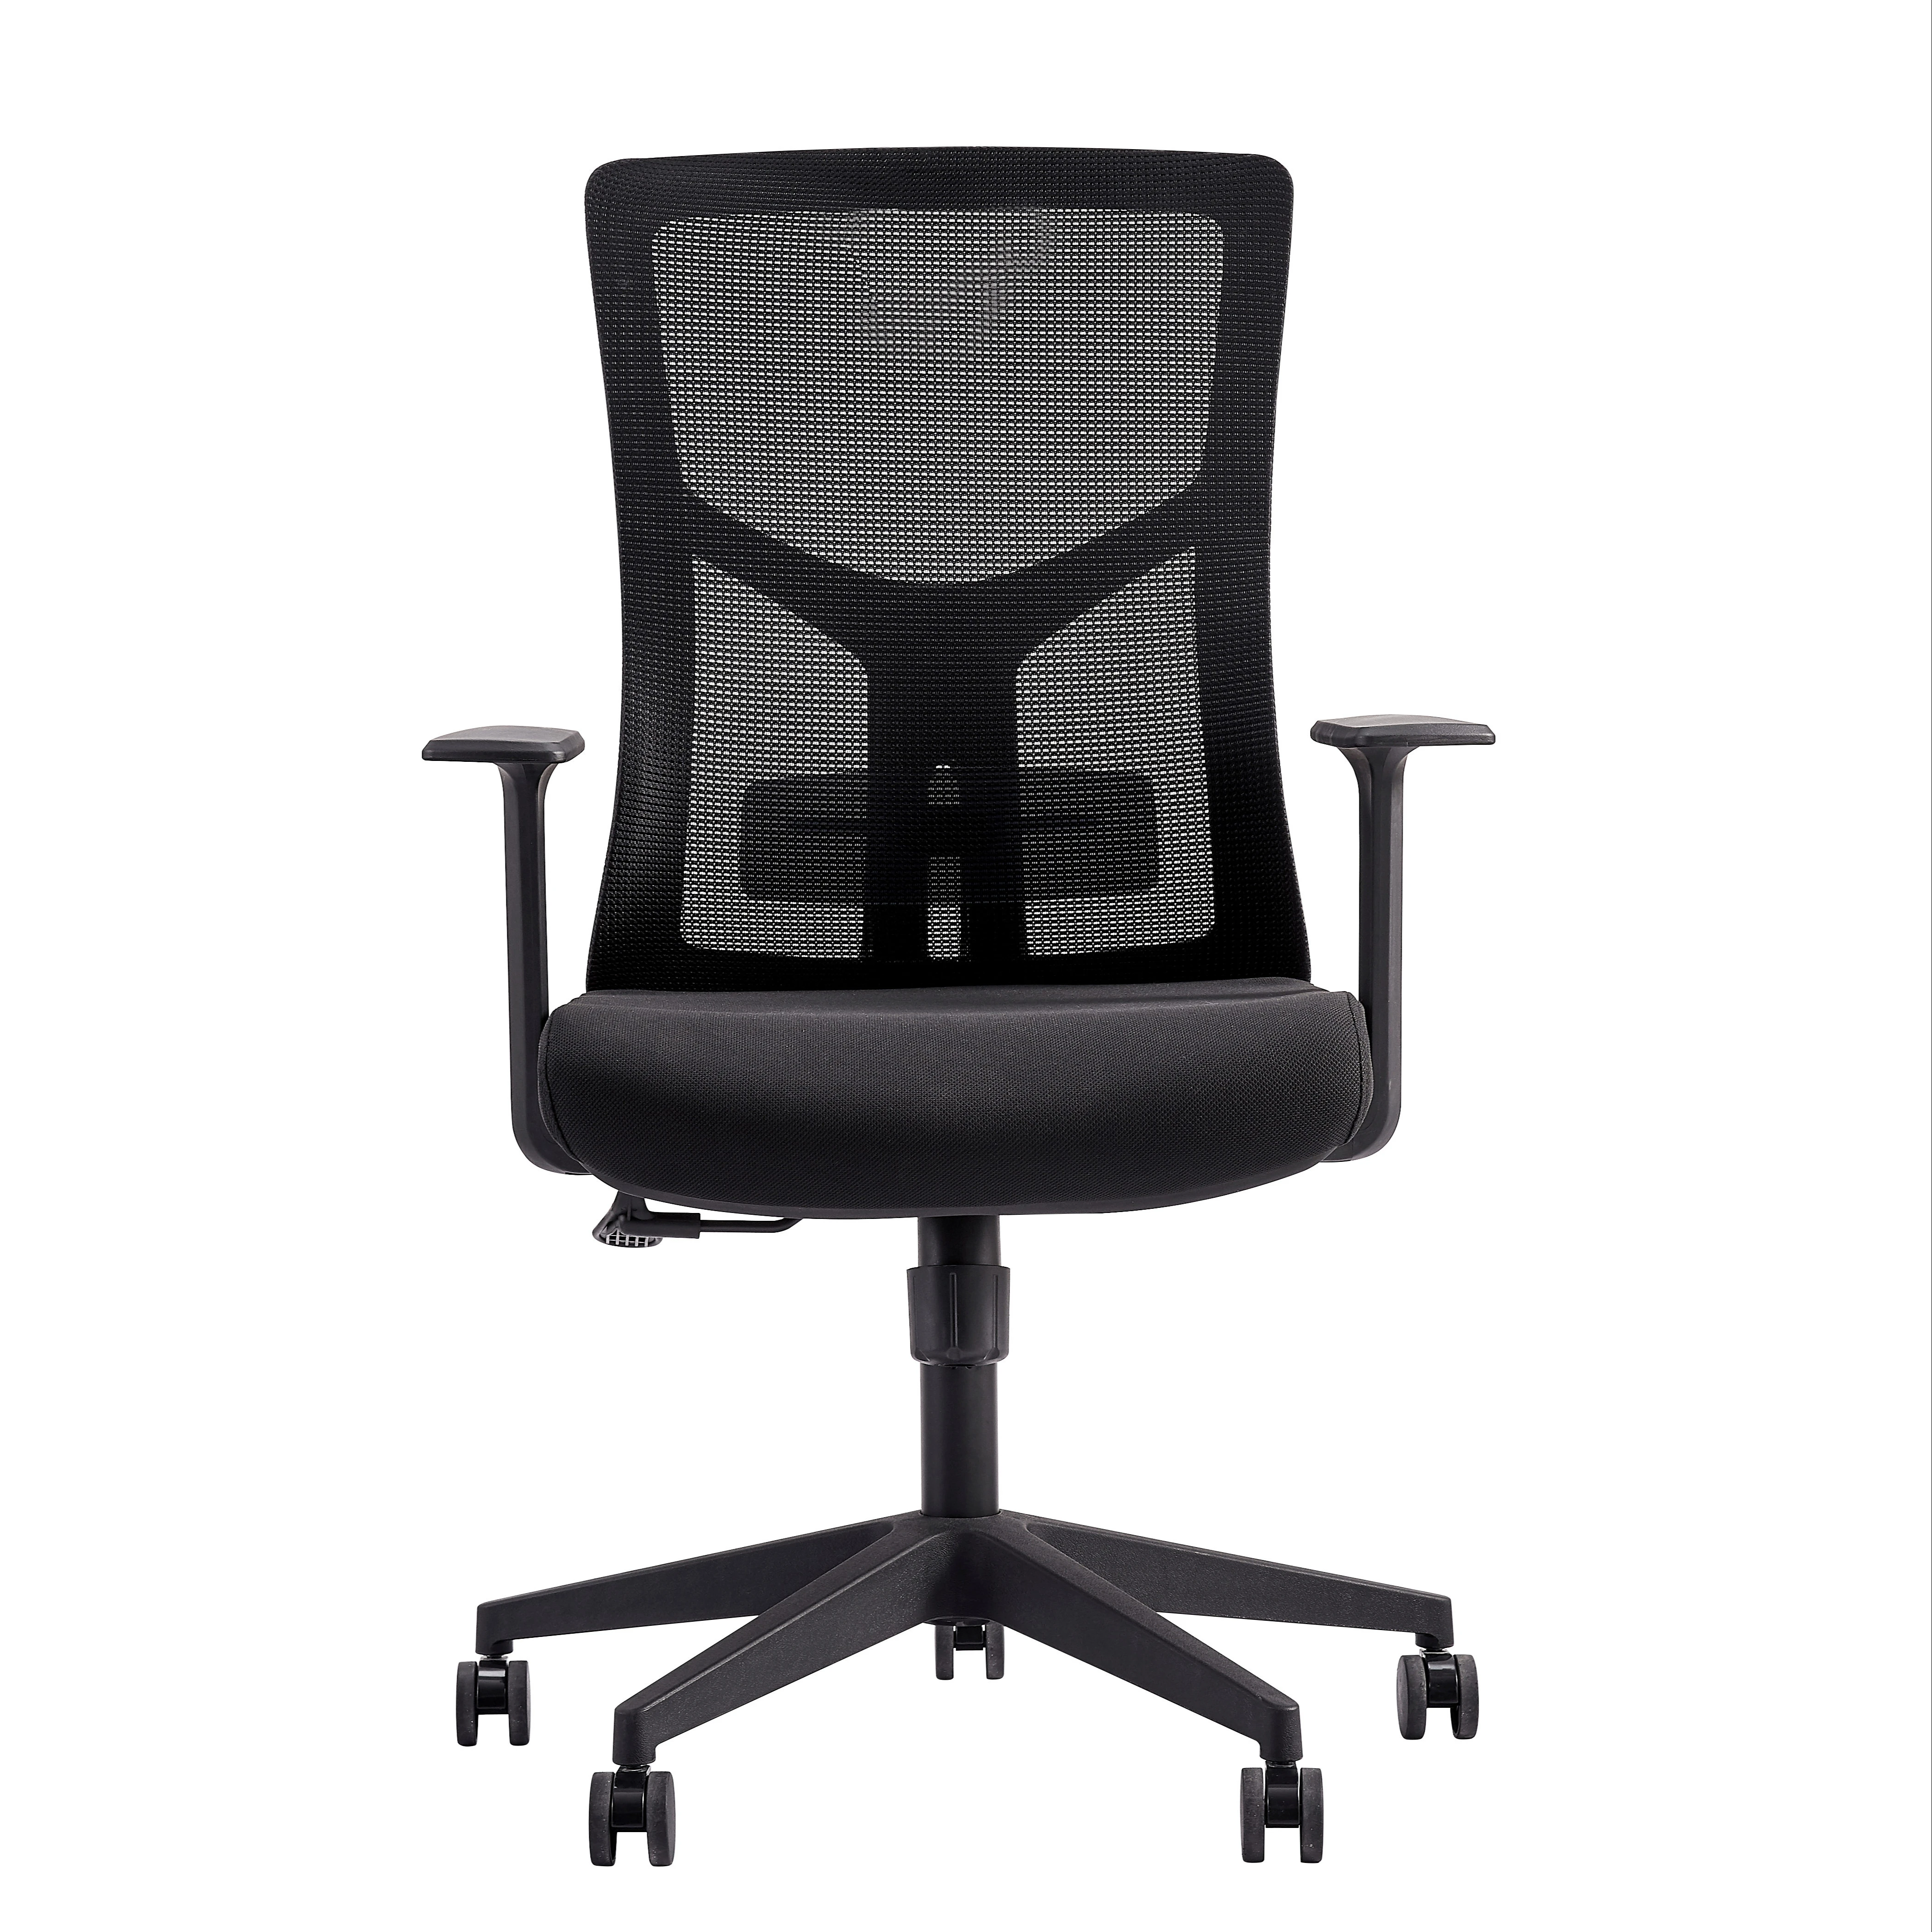 621b Swivel Executive Chair Office Chair Ergonomic for Commercial Furniture (1700008127769)